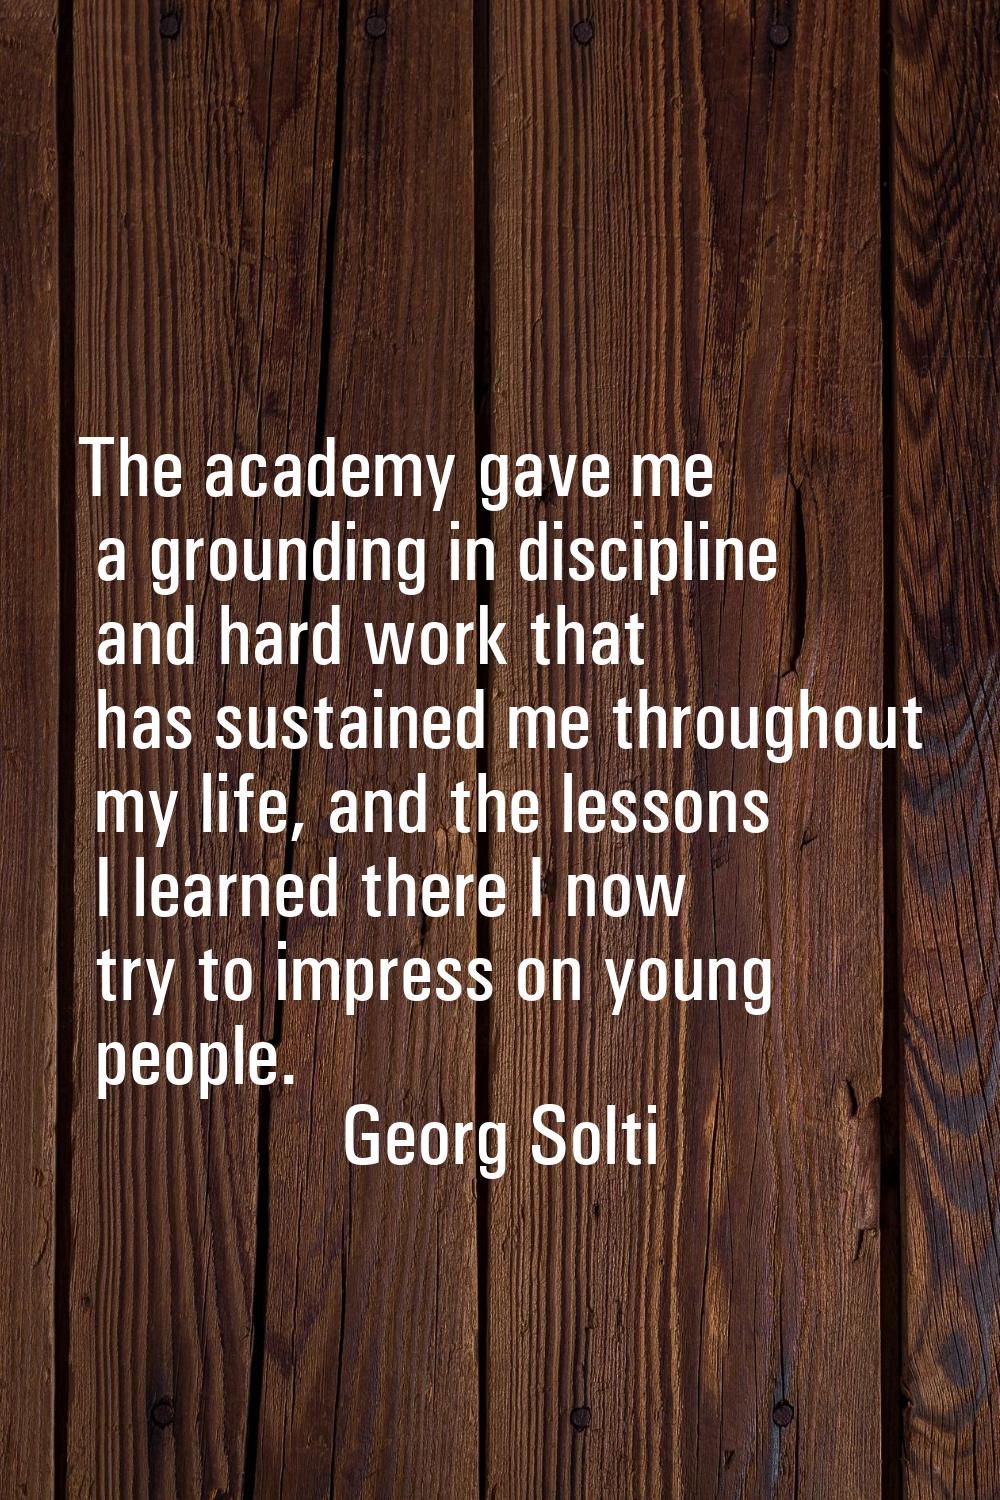 The academy gave me a grounding in discipline and hard work that has sustained me throughout my lif